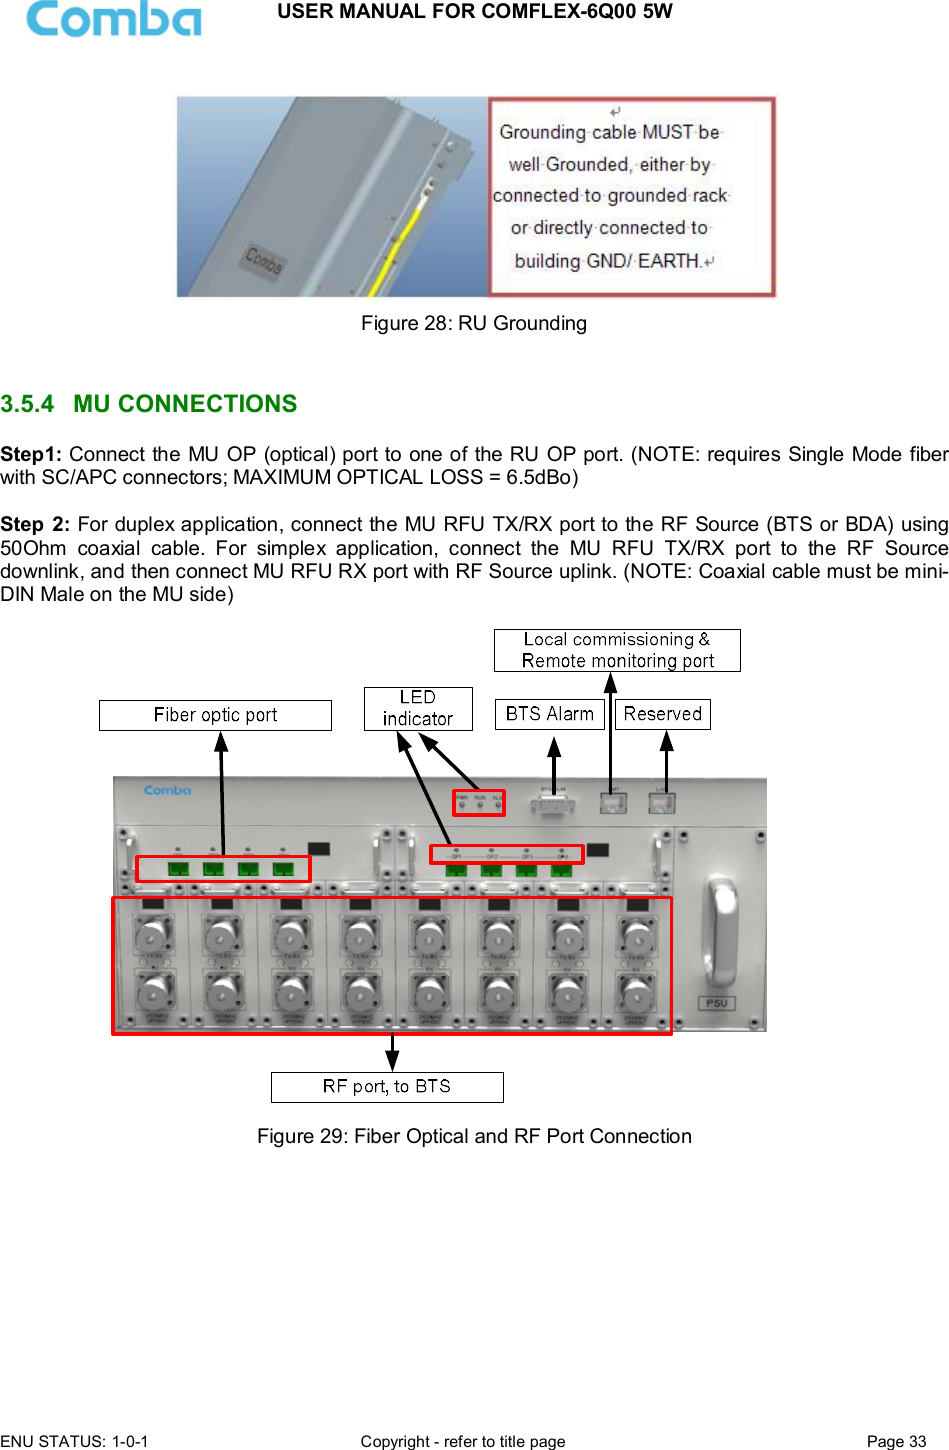 USER MANUAL FOR COMFLEX-6Q00 5W  ENU STATUS: 1-0-1  Copyright - refer to title page  Page 33        Figure 28: RU Grounding   3.5.4  MU CONNECTIONS Step1: Connect the MU OP (optical) port to one of the RU OP port. (NOTE: requires Single Mode fiber with SC/APC connectors; MAXIMUM OPTICAL LOSS = 6.5dBo)  Step  2: For duplex application, connect the MU RFU TX/RX port to the RF Source (BTS or BDA) using 50Ohm  coaxial  cable.  For  simplex  application,  connect  the  MU  RFU  TX/RX  port  to  the  RF  Source downlink, and then connect MU RFU RX port with RF Source uplink. (NOTE: Coaxial cable must be mini-DIN Male on the MU side)    Figure 29: Fiber Optical and RF Port Connection           